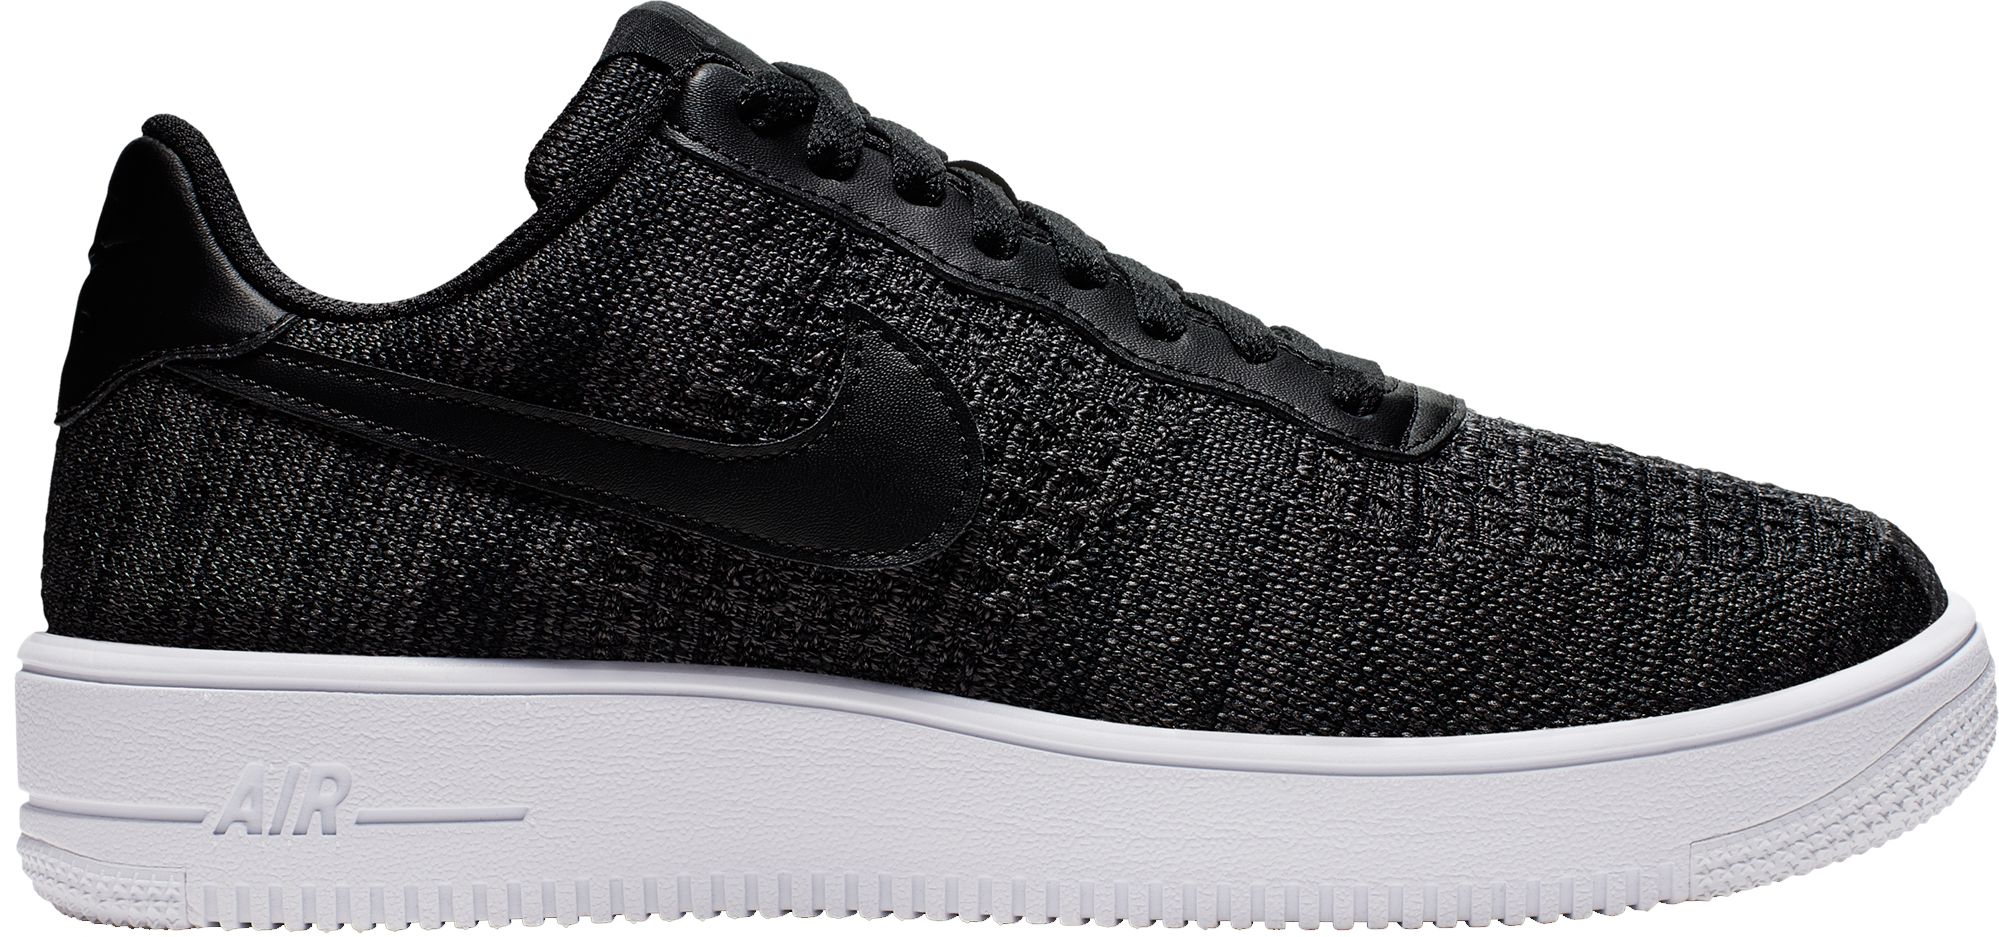 nike air force 1 flyknit review